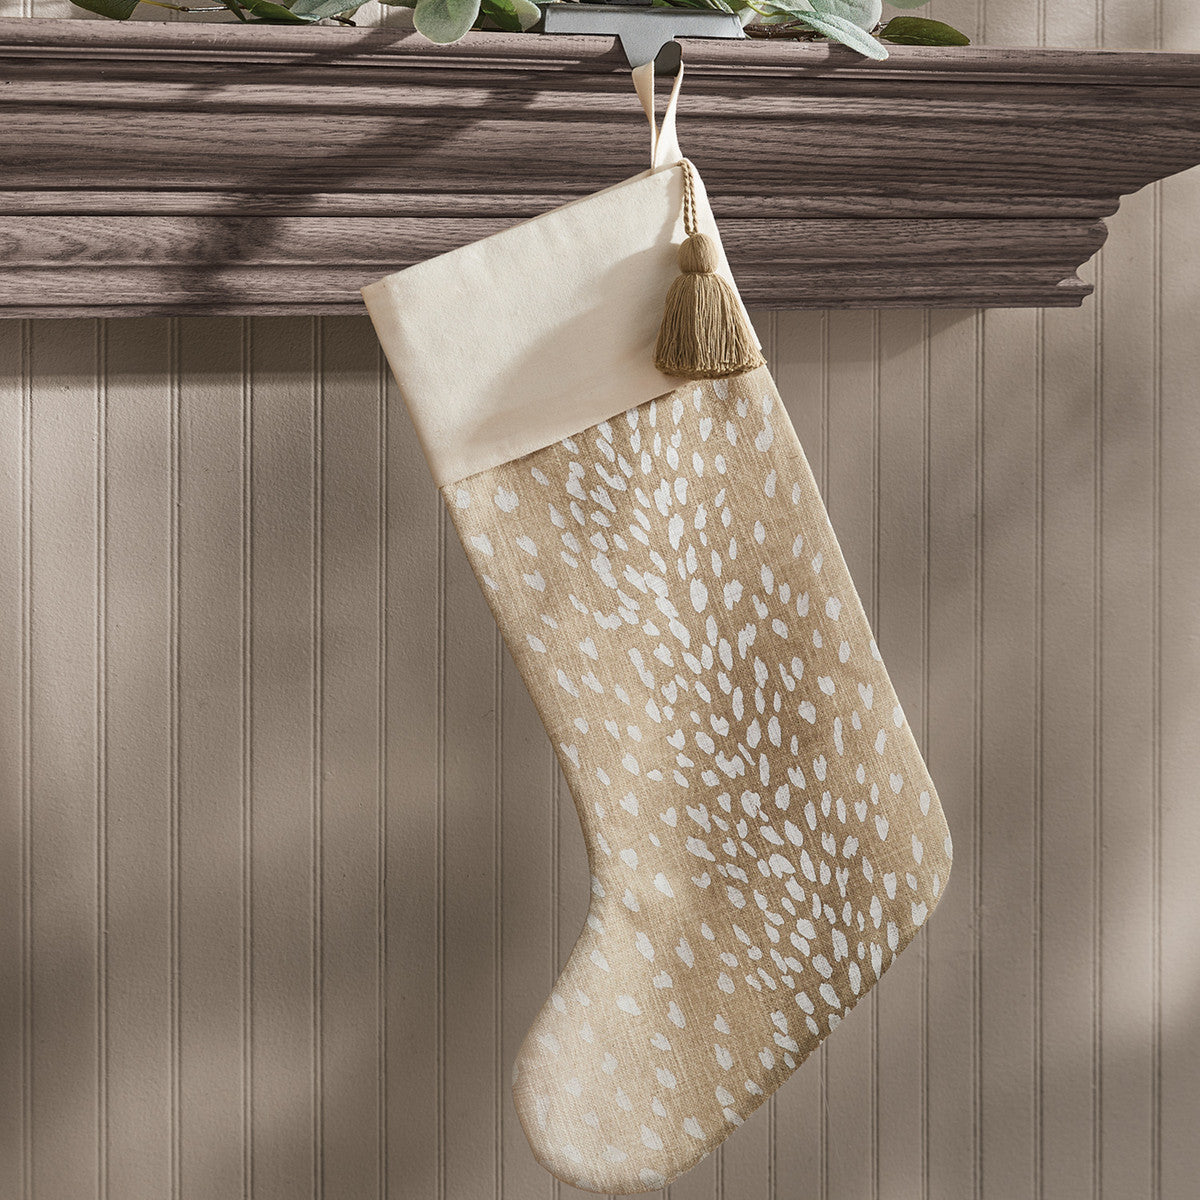 Axis Tan Stocking  Each Set of 2  Park Designs